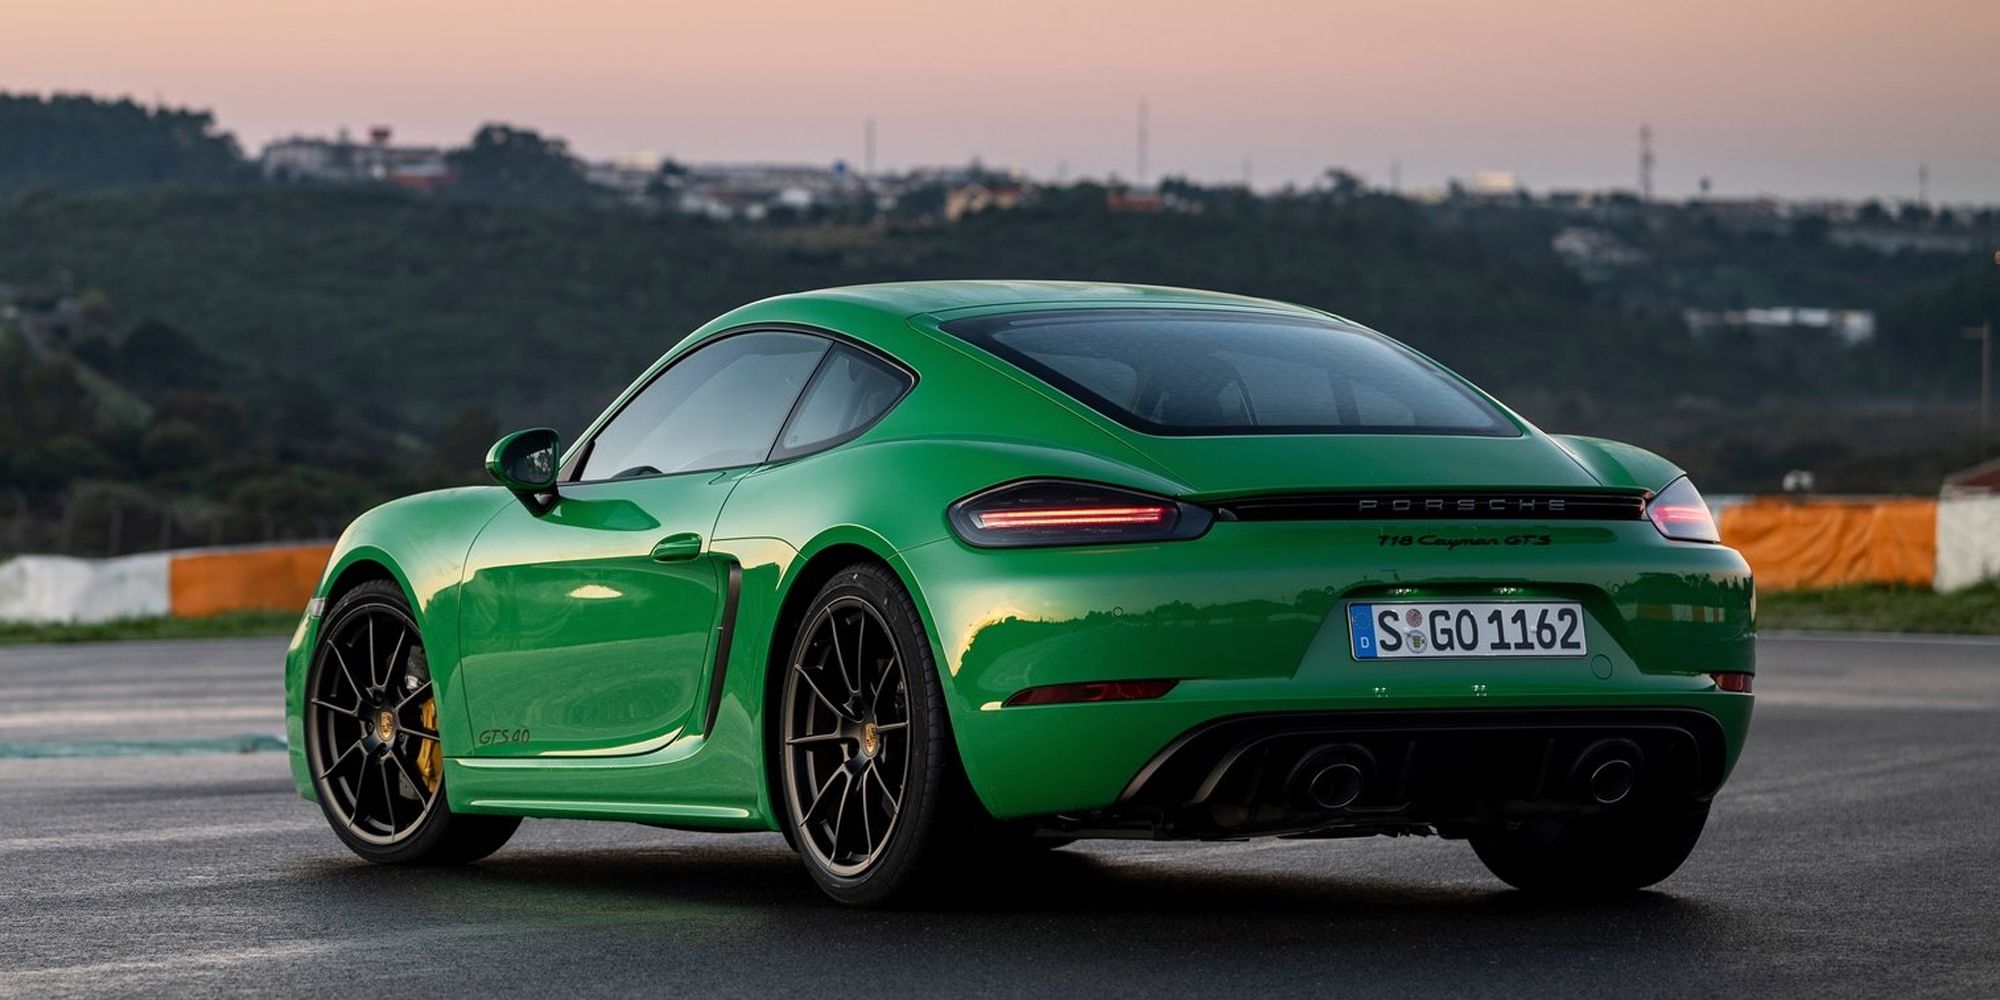 The rear of the 718 Cayman GTS 4.0